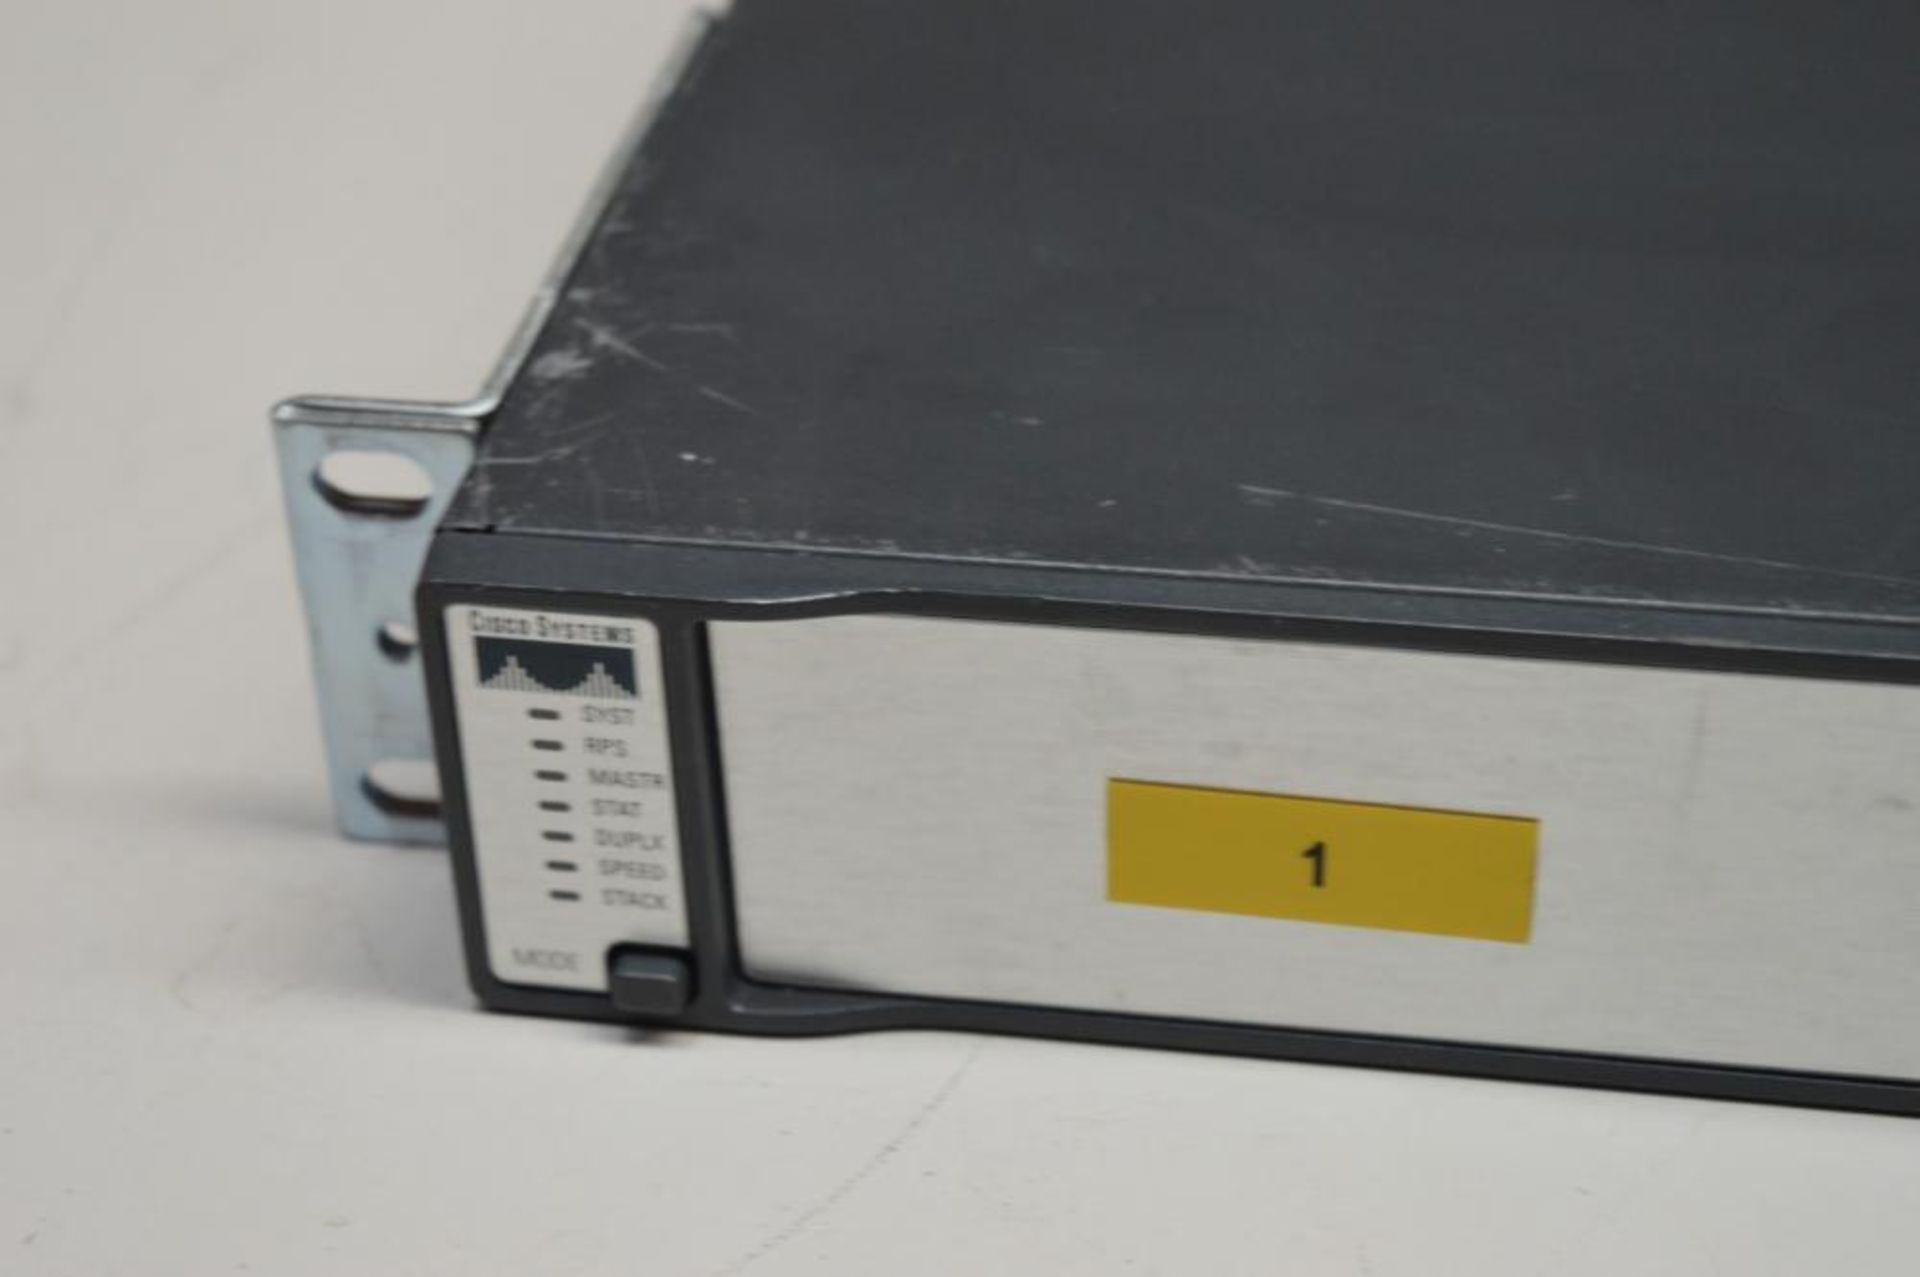 1 x Cisco Catalyst 3750G Series WS-C3750G-24TS Network Switch - CL285 - Ref J793 - Location: Altrinc - Image 3 of 5